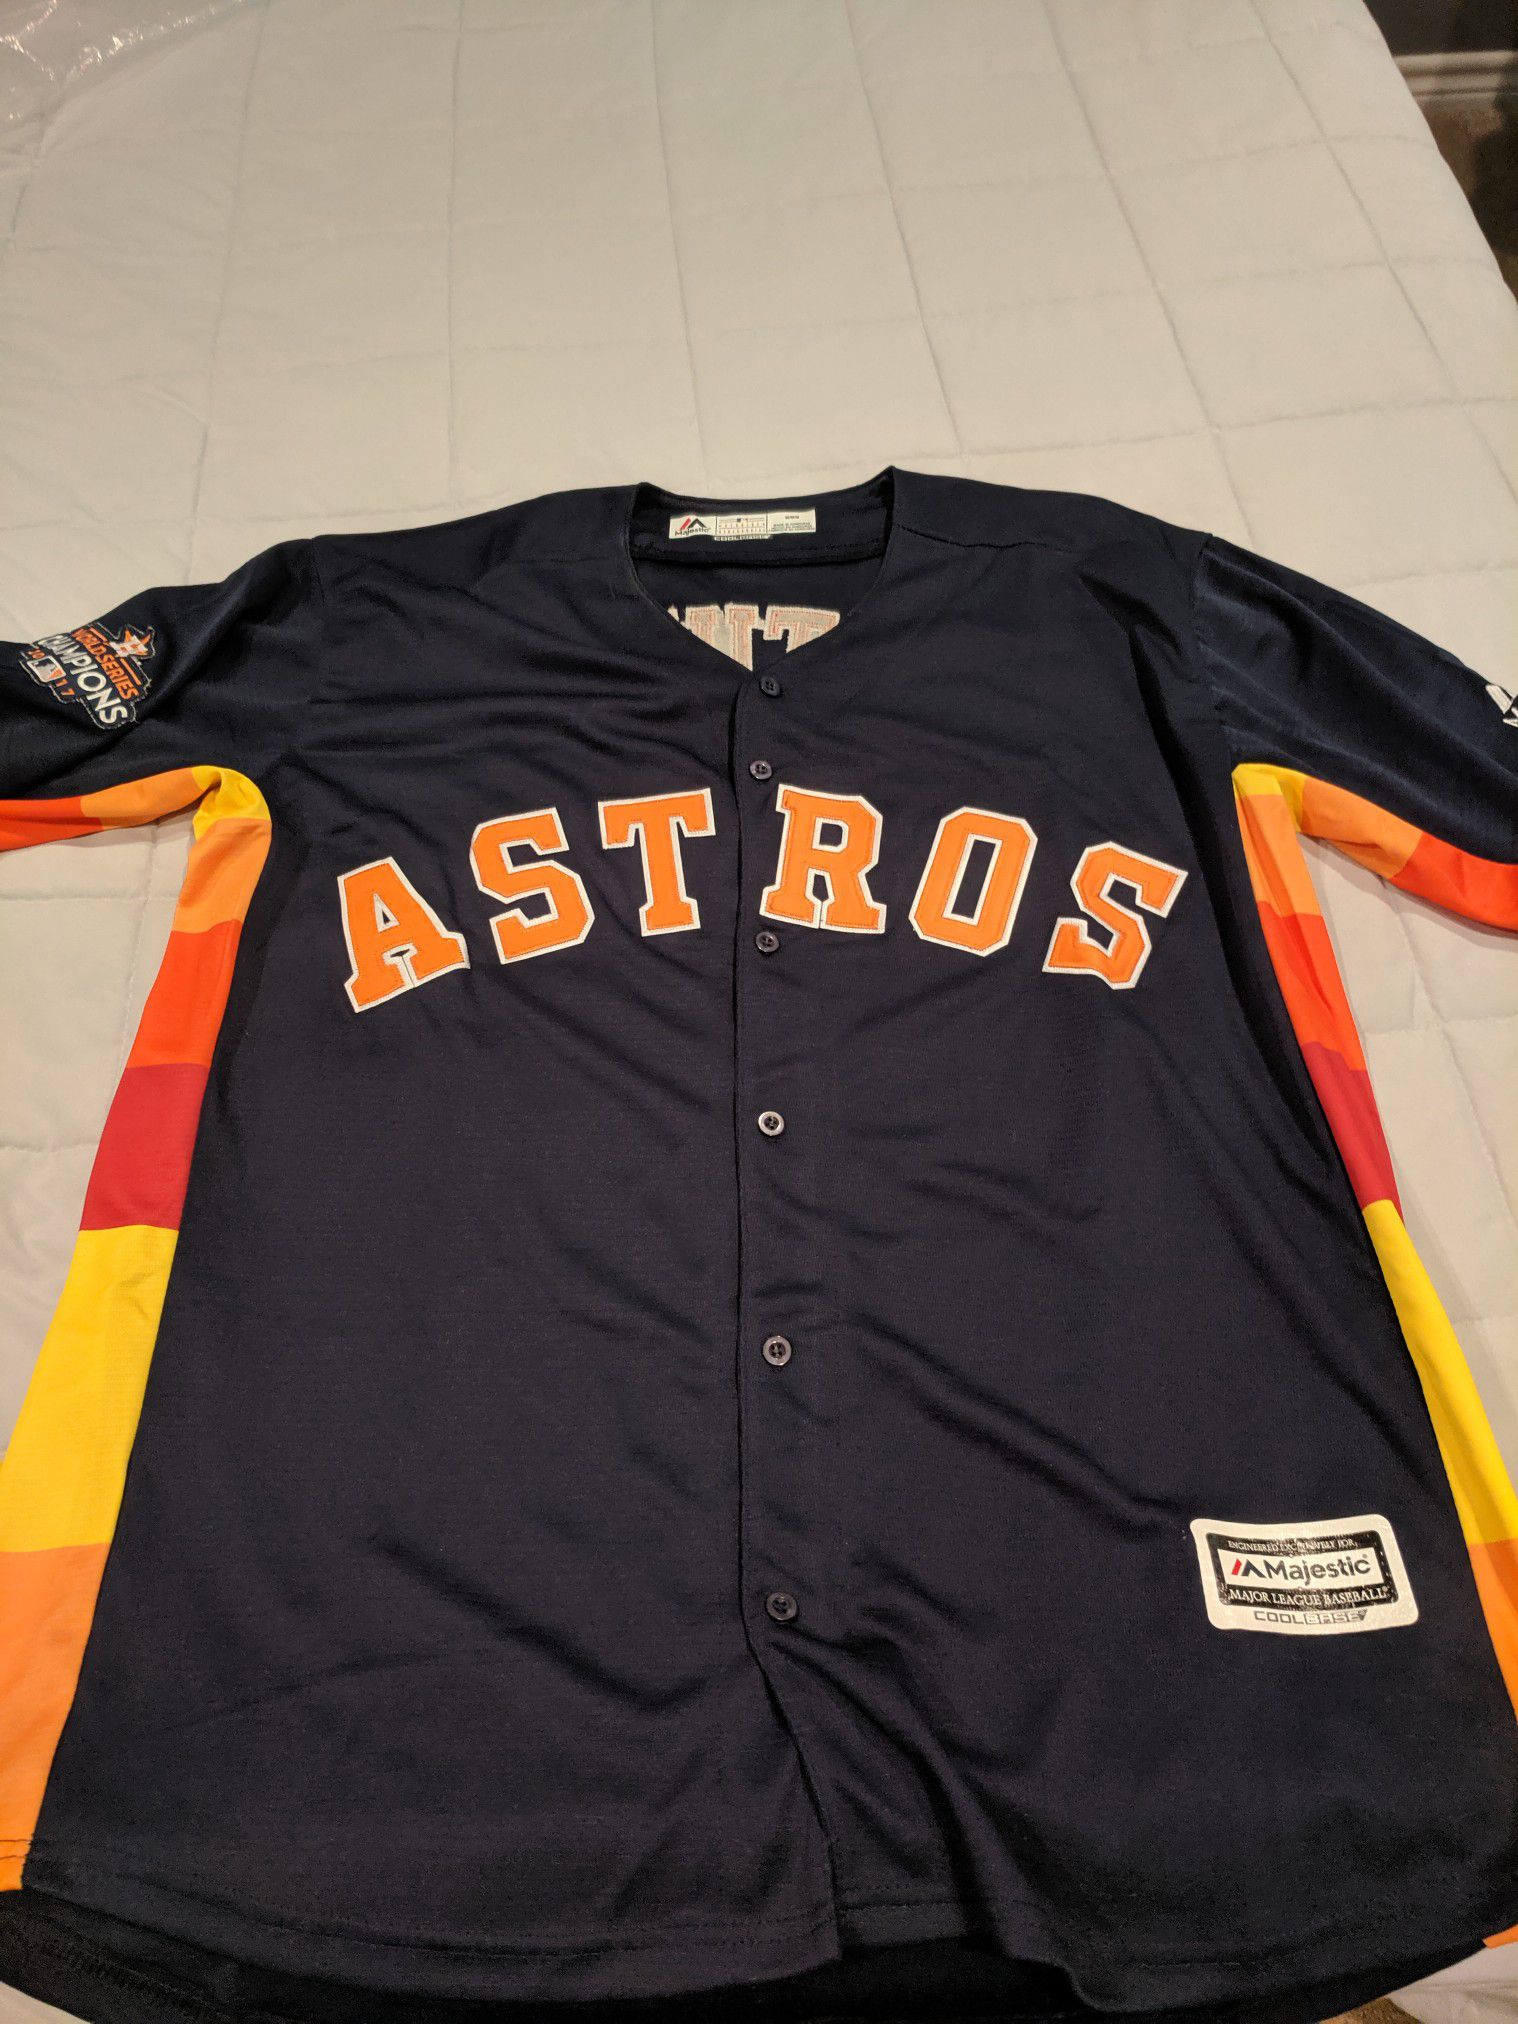 Brand New Astros Altuve jersey with World Series patch!!